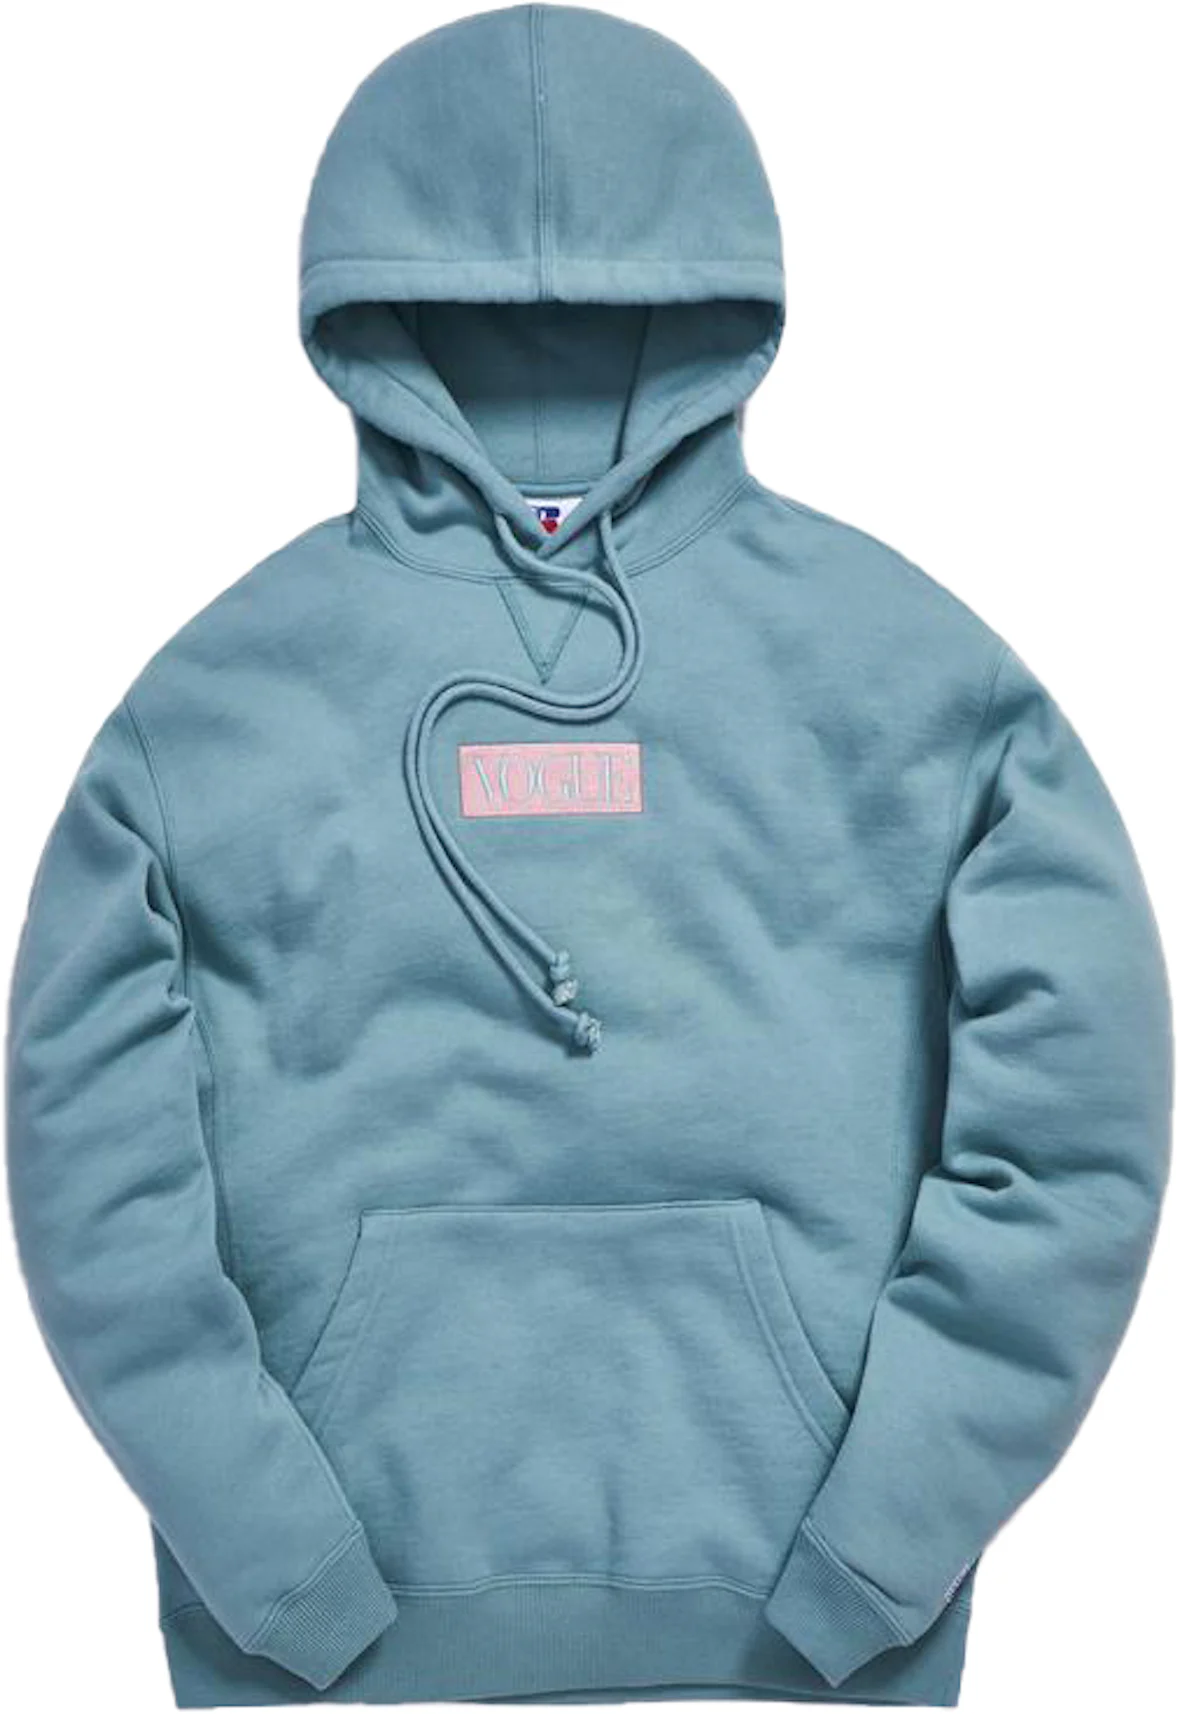 Kith x Russell Athletic x Vogue Hoodie Trellis